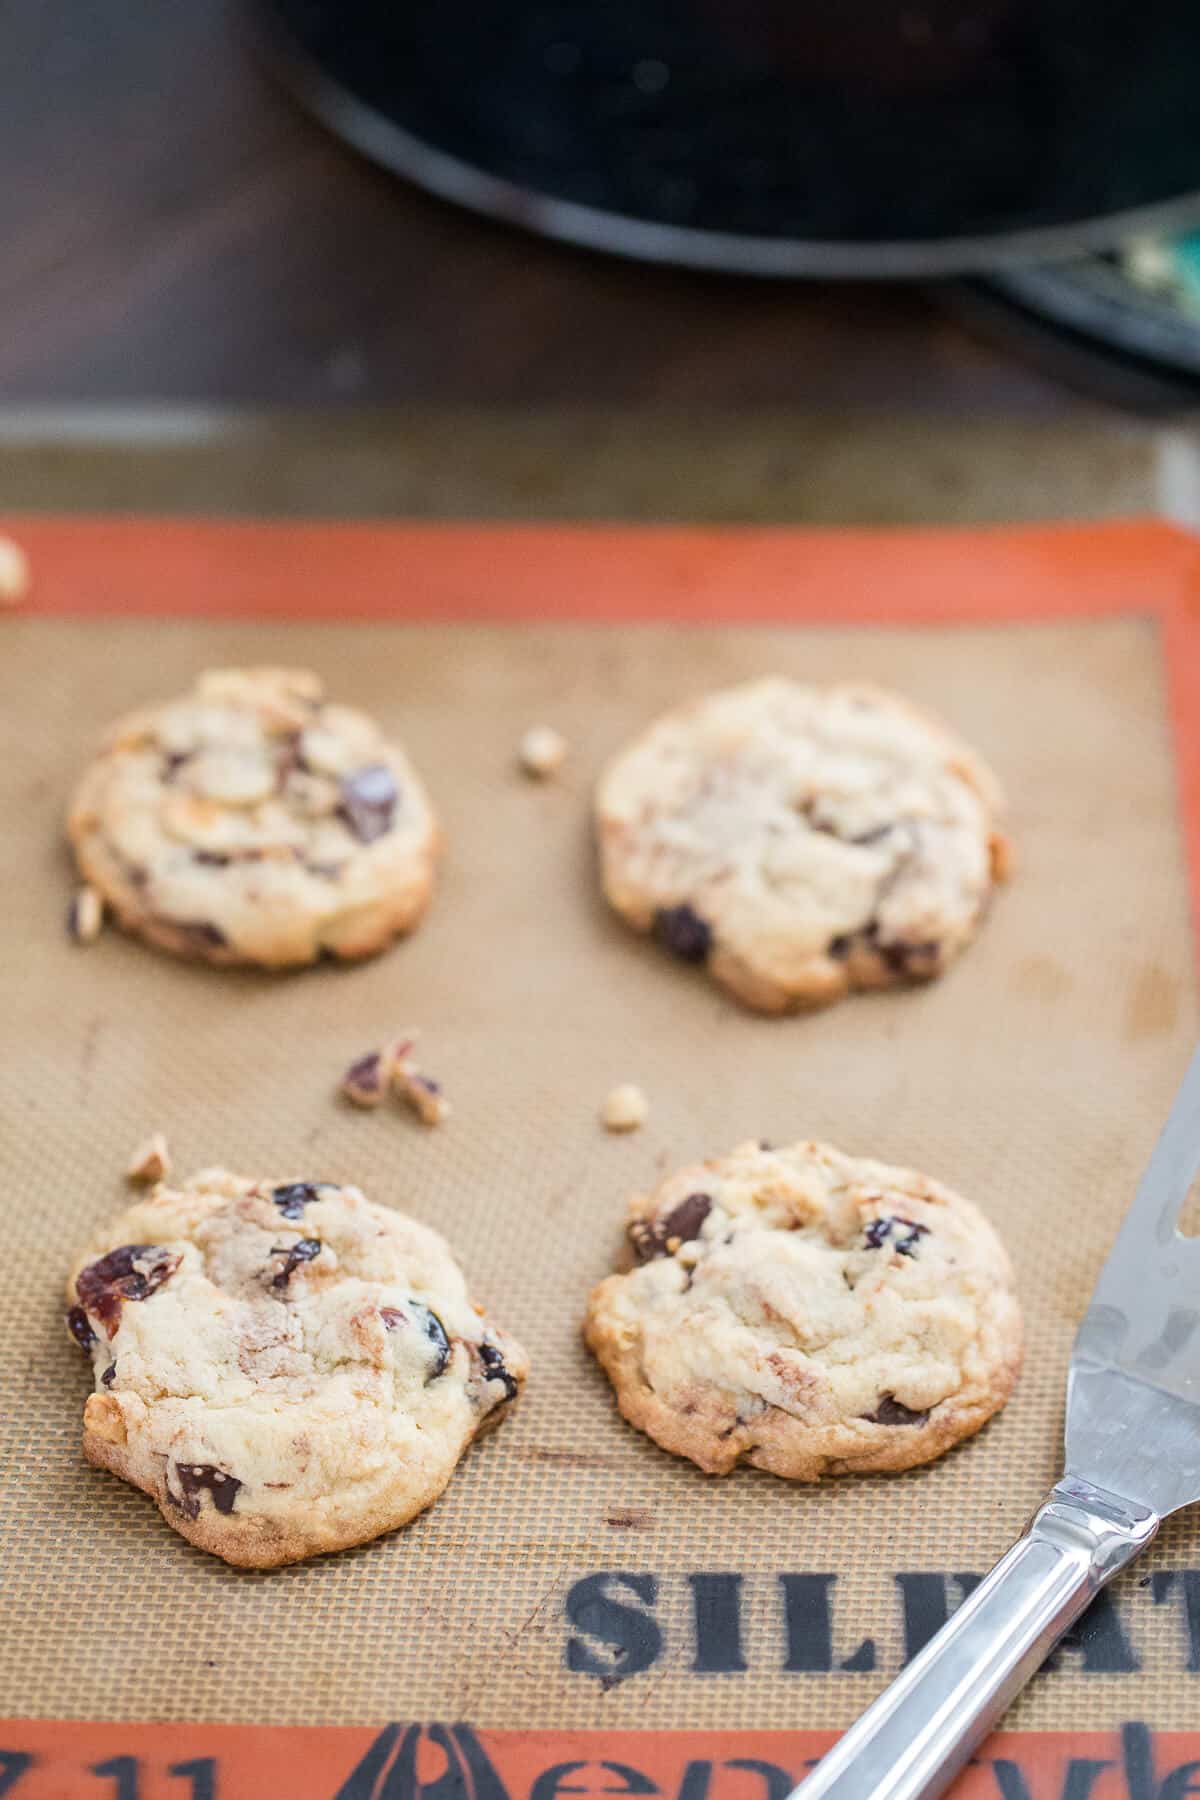 Cherry chip cookies have soft, drunken cherries blended with chocolate chunks and hazelnuts. This a true cookie experience!